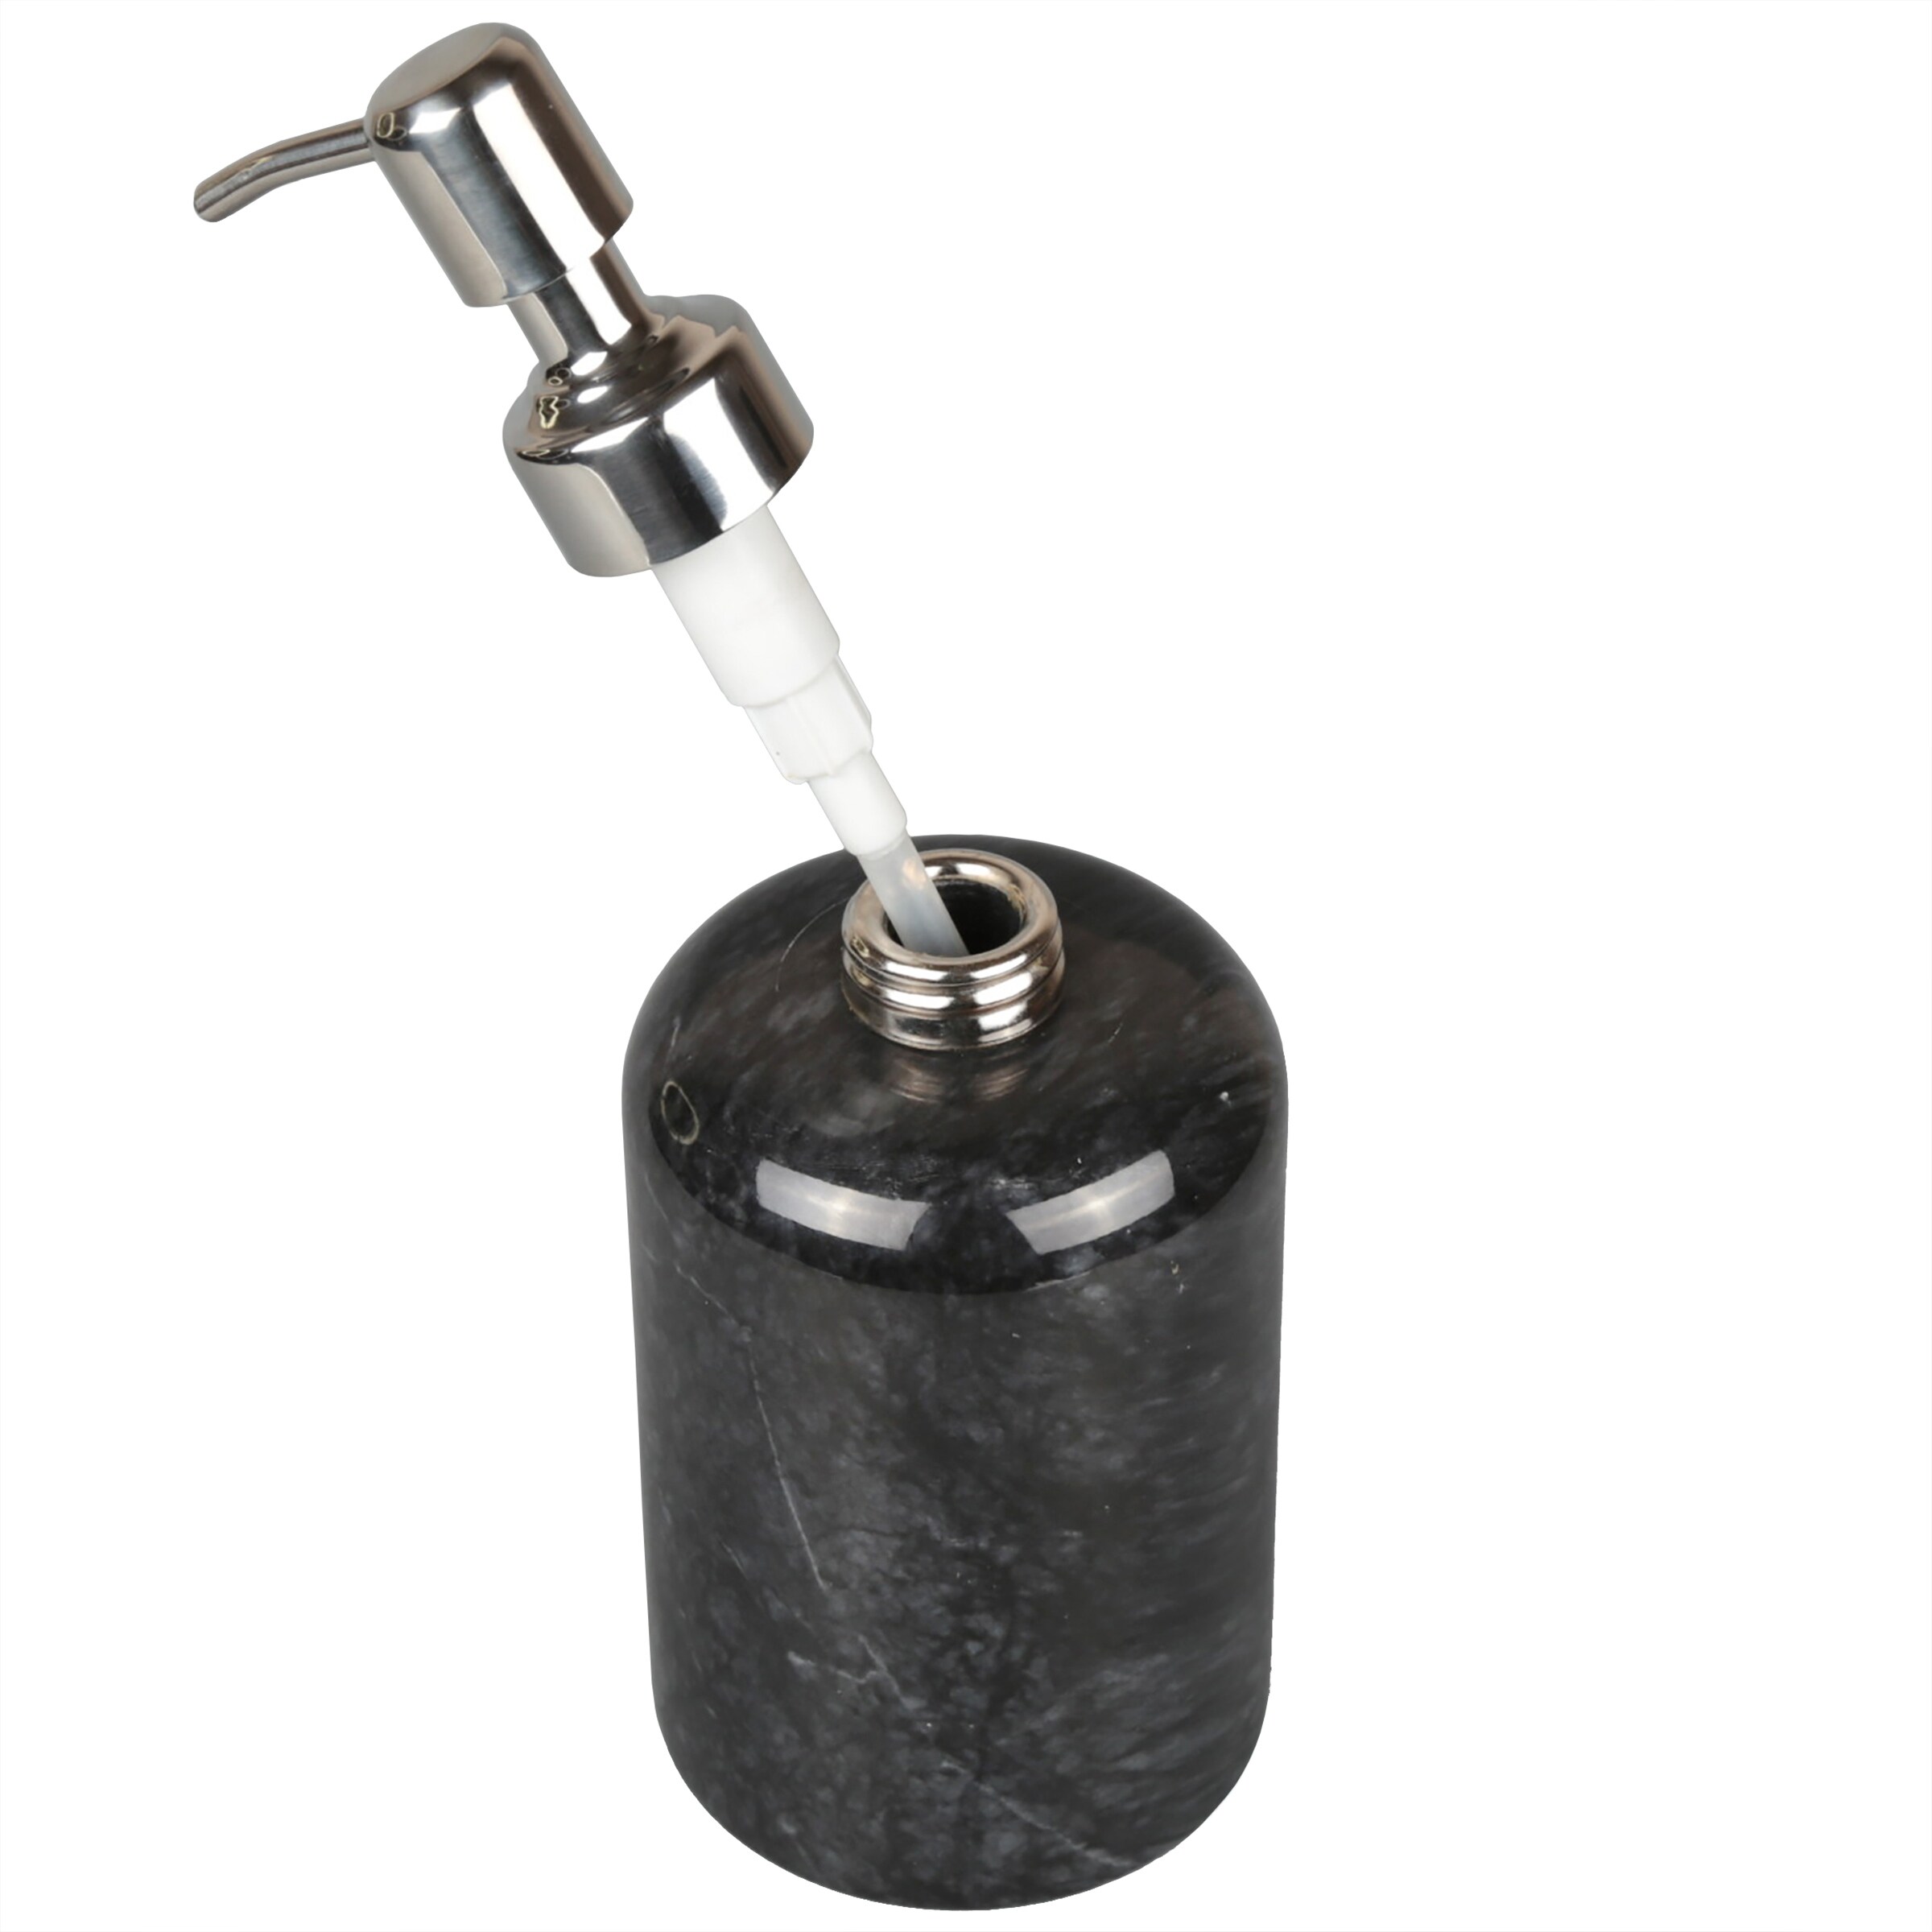 https://ak1.ostkcdn.com/images/products/is/images/direct/f44bbe13429d5da28c1275cc70f8a763b5c6cf1d/Creative-Home-Spa-Black-Marble-Soap-Dispenser.jpg